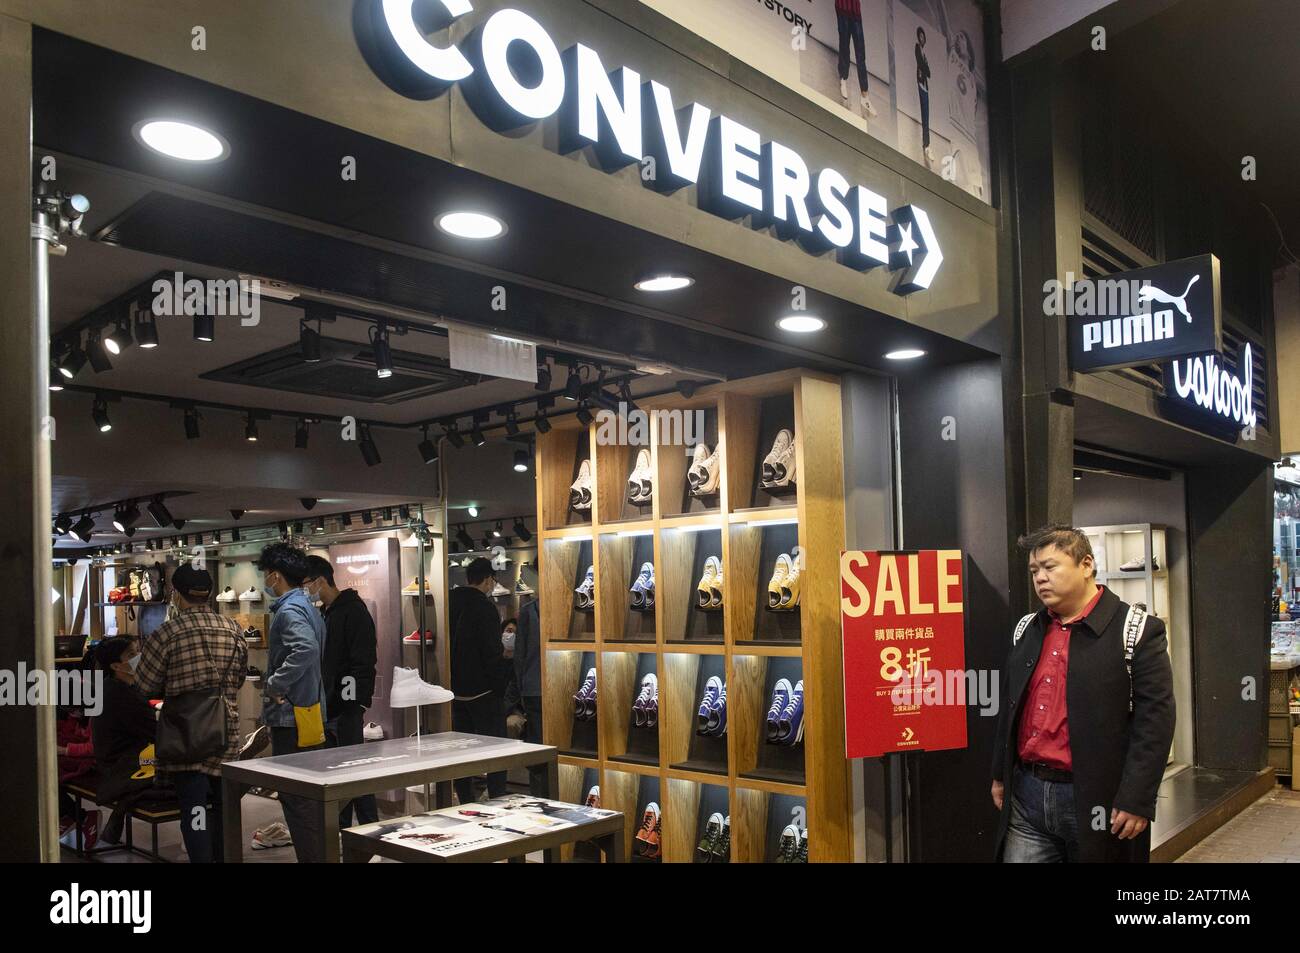 converse outlet qld